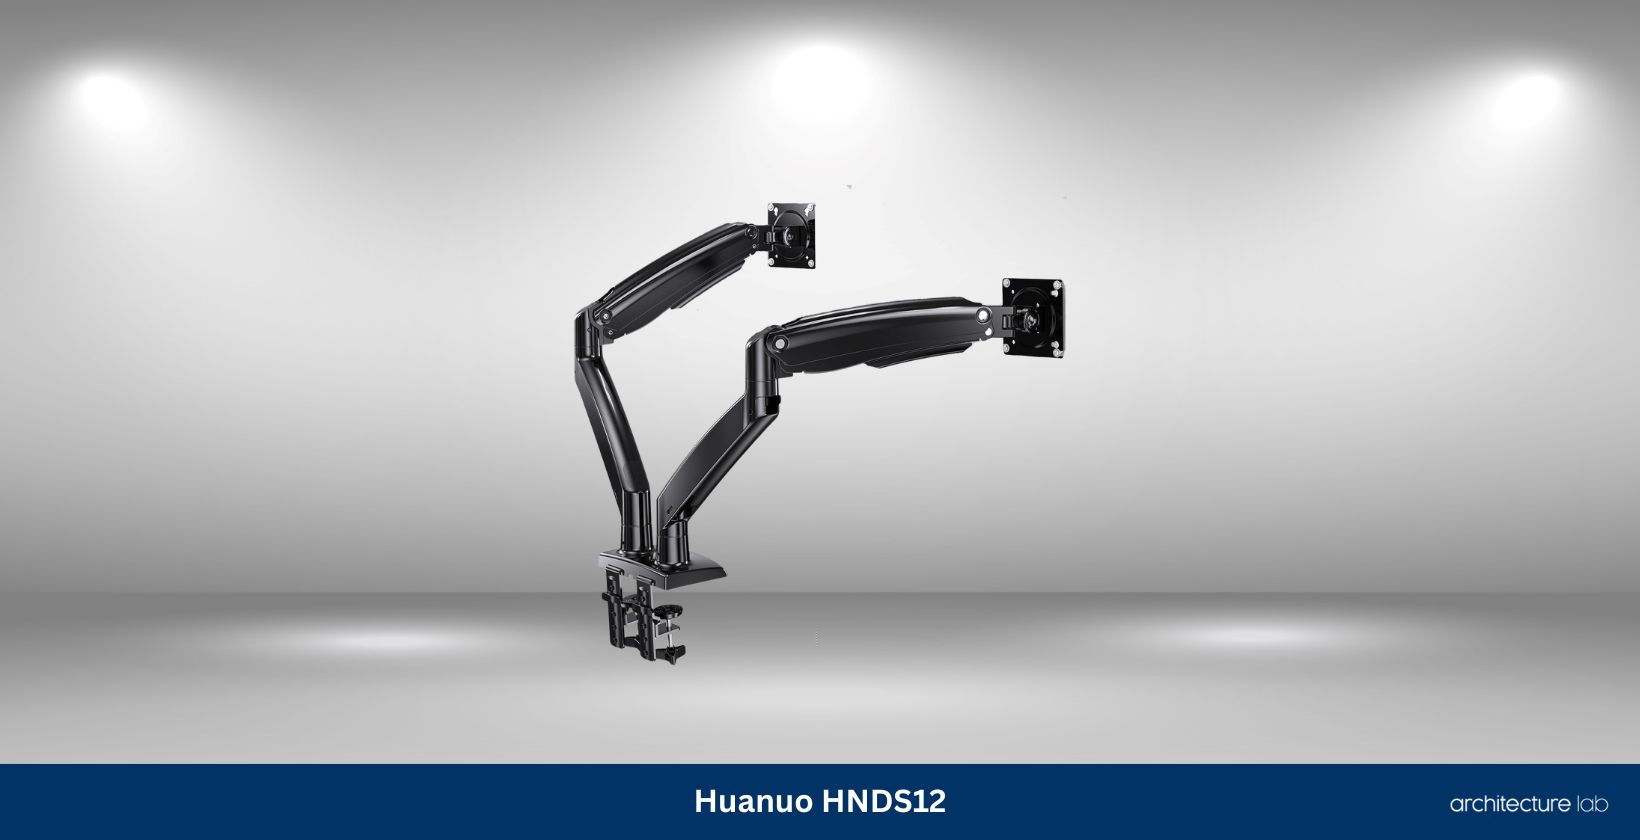 Huanuo hnds12